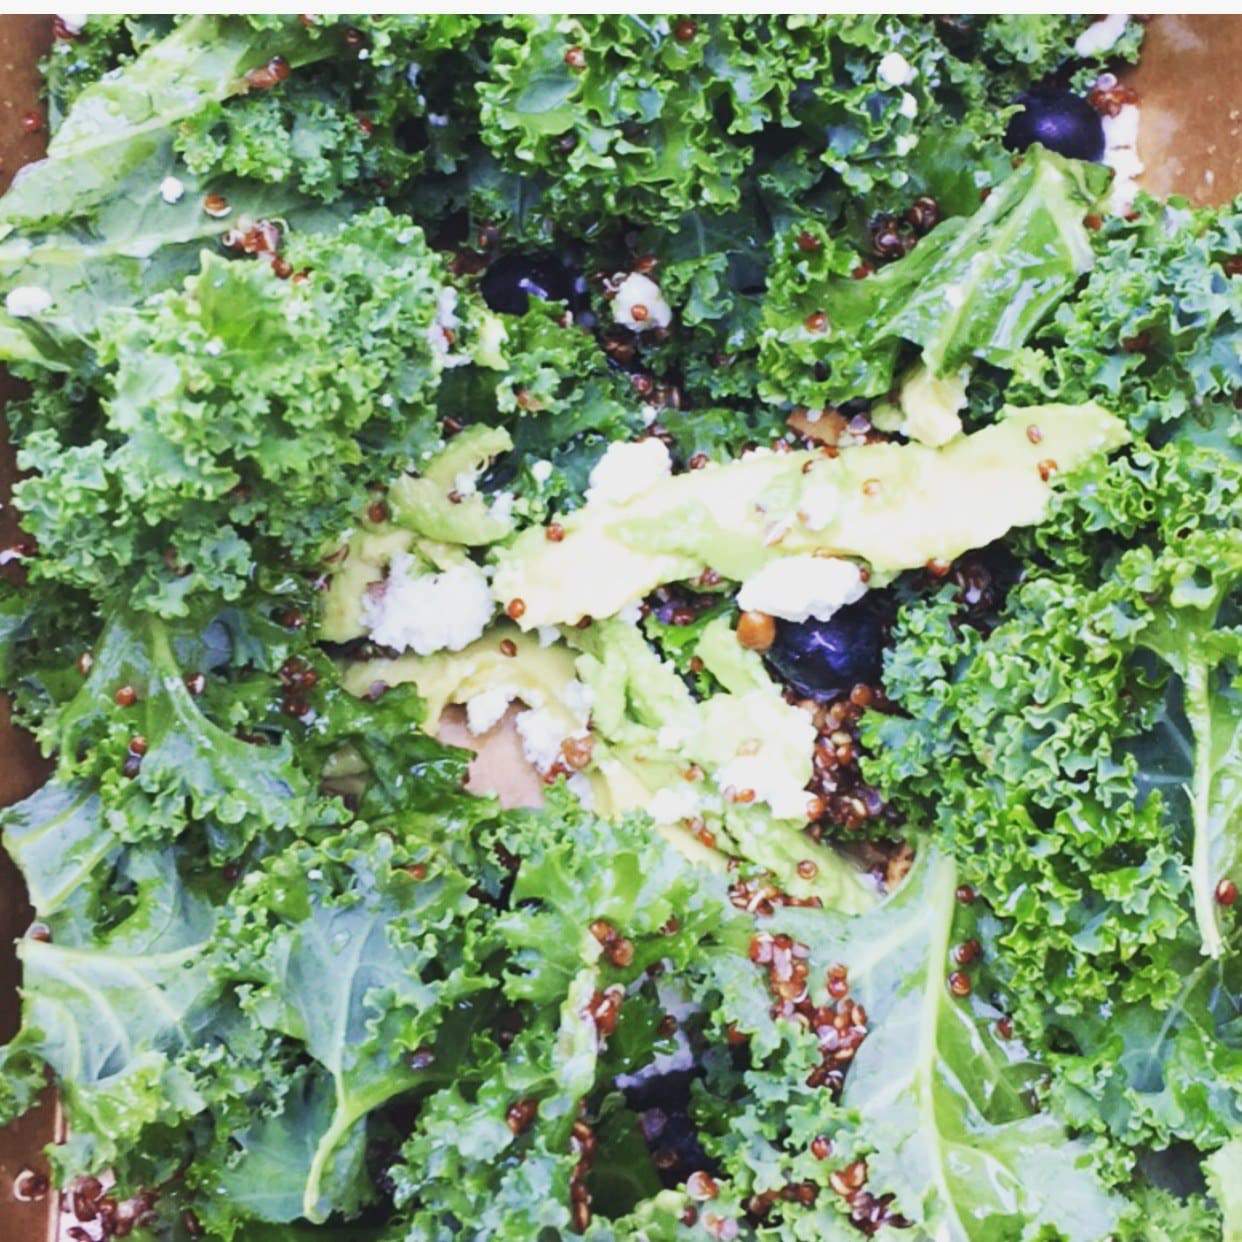 The Kale and Quinoa salad from The Hospitality Sweet. Photo by Kelsey Corban.